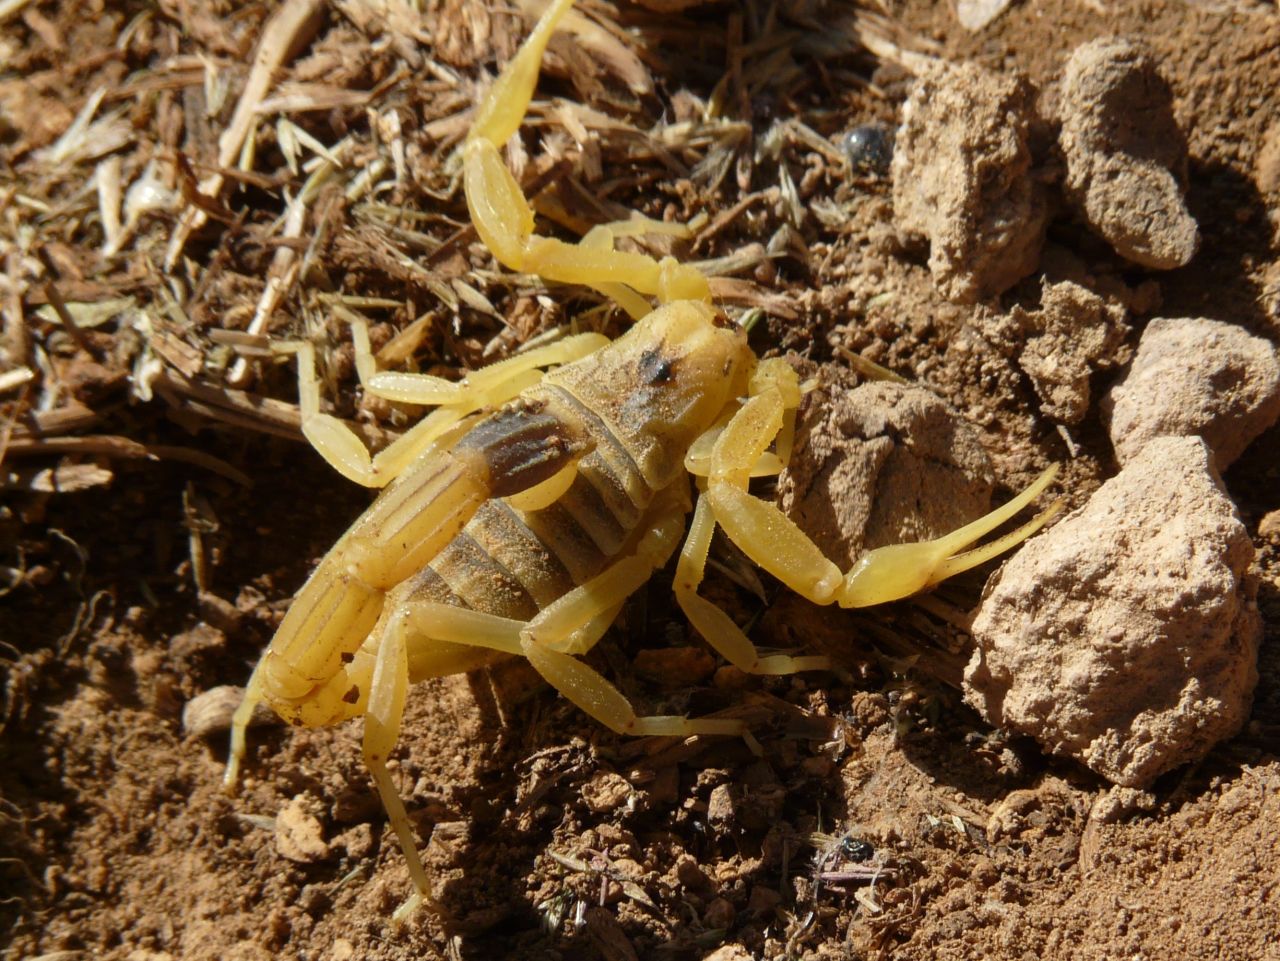 The venom of the deathstalker scorpion has been in trials for use during surgery to help surgeons locate tumors in the body.